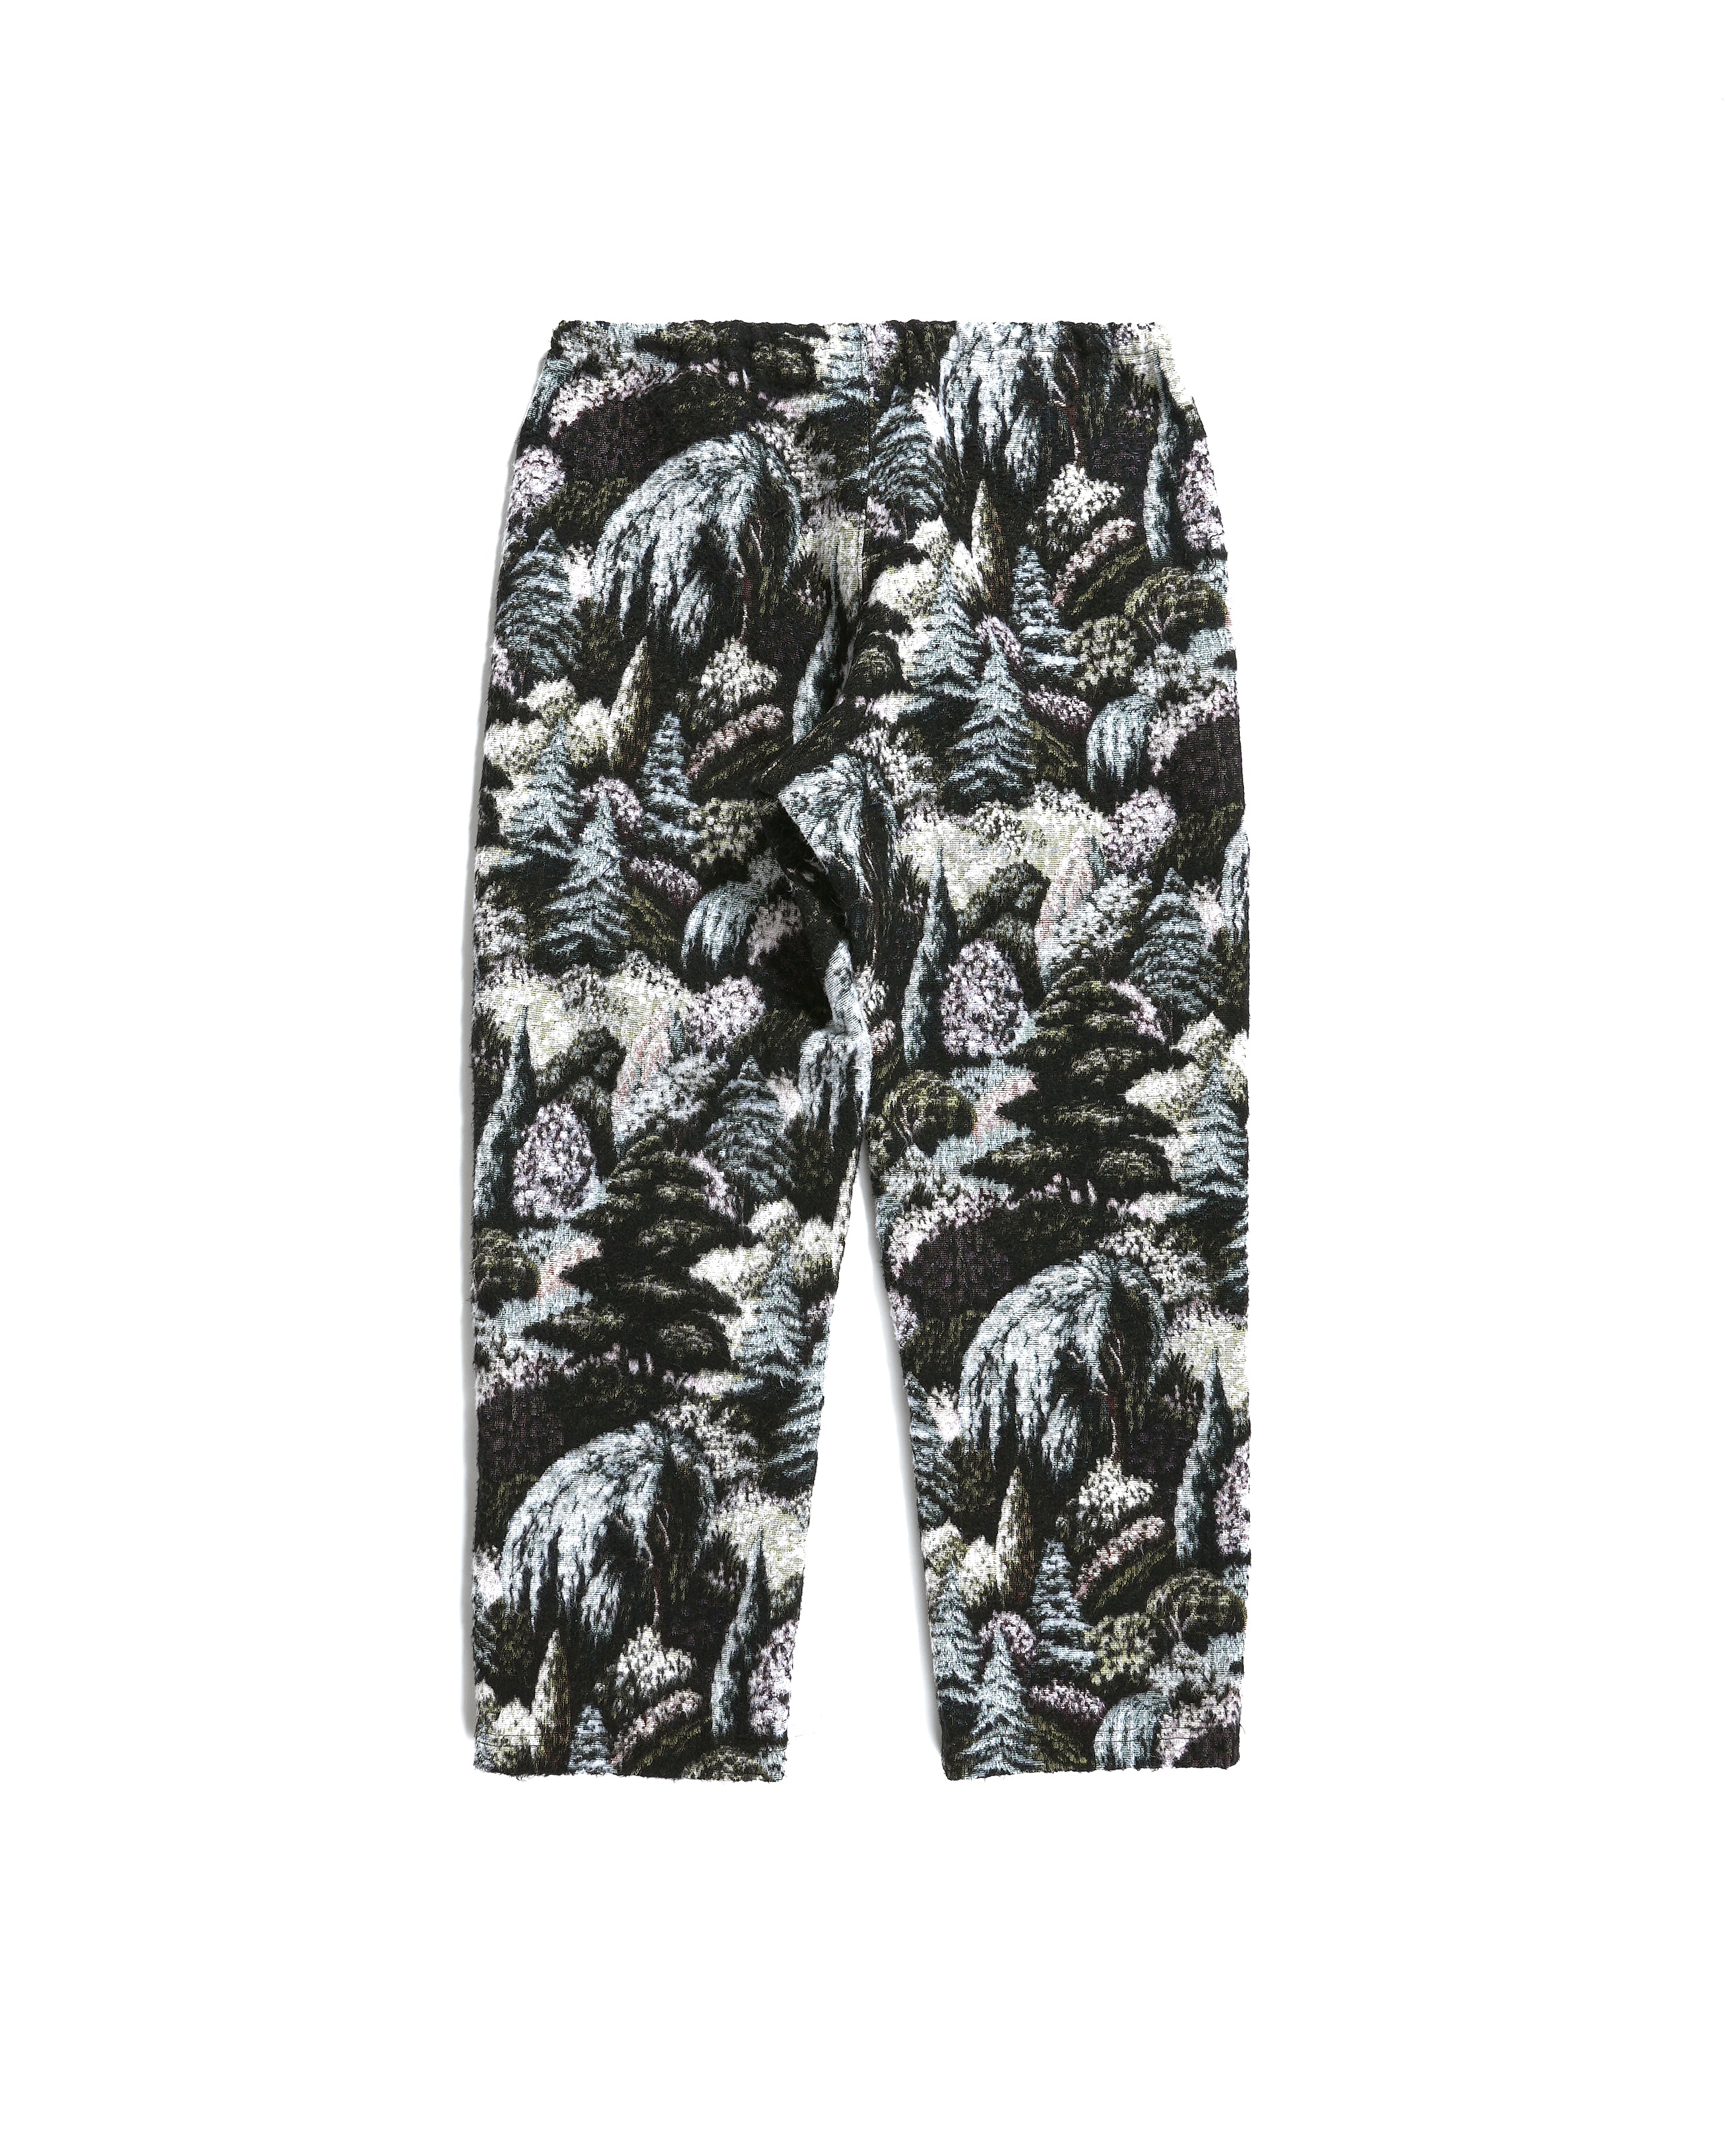 STK Pant - Green CP Forest Jacquard